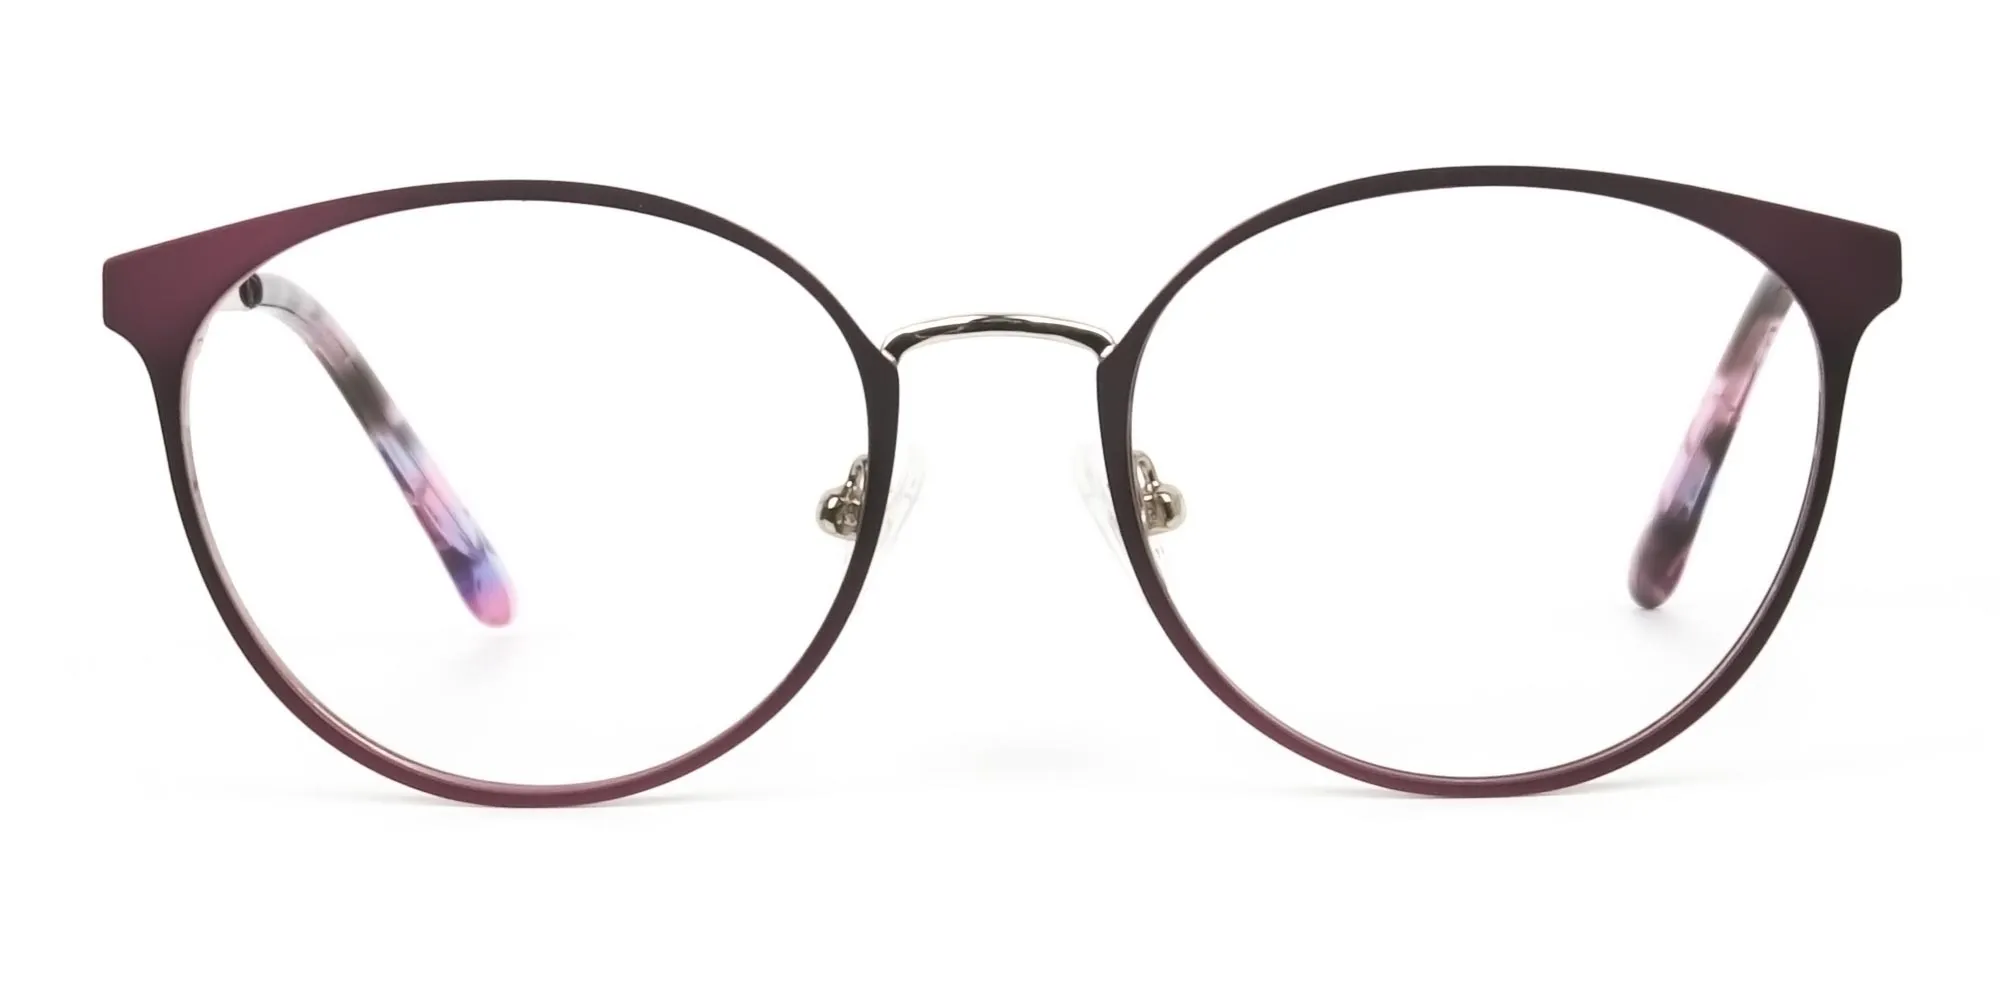 Silver Burgundy Red Spectacle Frames in Round - 2